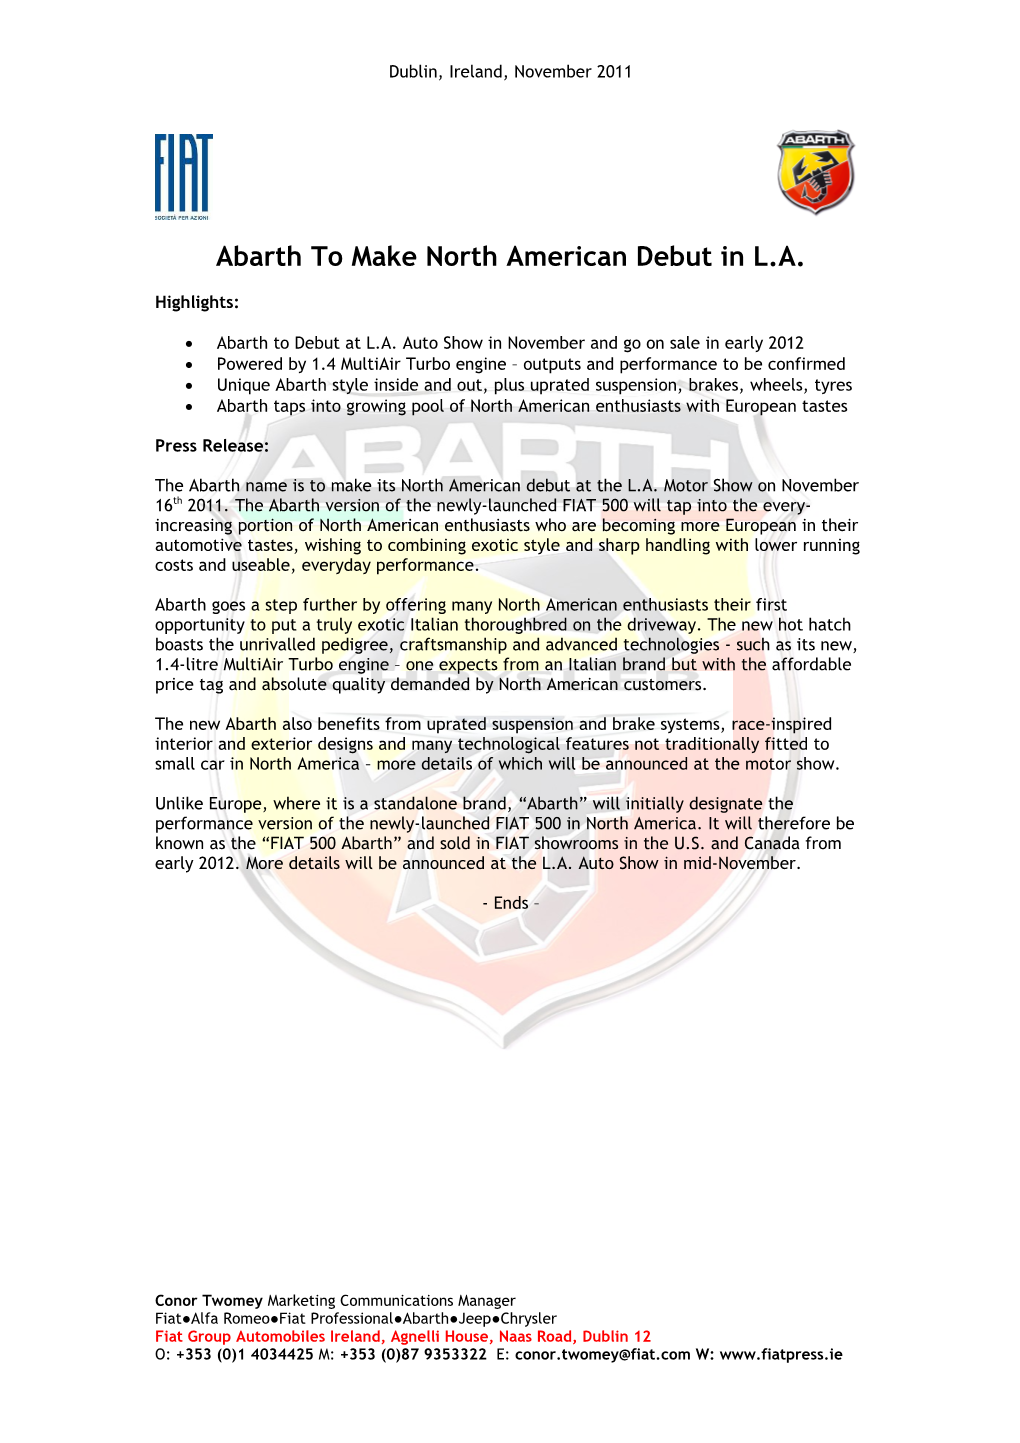 Abarth to Make North American Debut in L.A